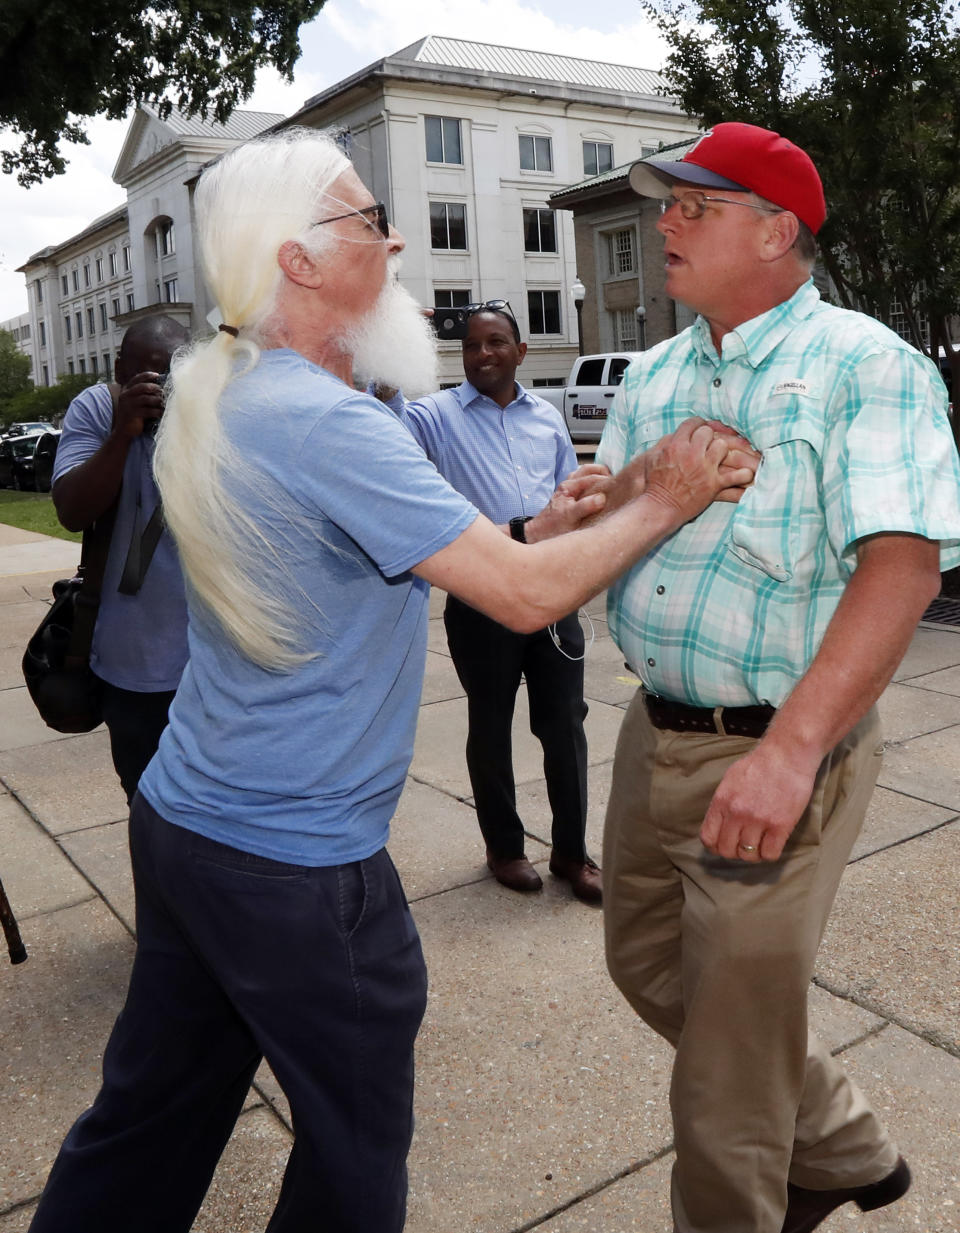 An abortion rights advocate who did not want to be identified detains Coleman Boyd, right, an anti-abortion supporter, as he tries to disrupt a gathering of rights advocates who gathered at the Capitol in Jackson, Miss., to voice their opposition to the state legislature passing a new law that prohibits most abortions once a fetal heartbeat can be detected, Tuesday, May 21, 2019. (AP Photo/Rogelio V. Solis)